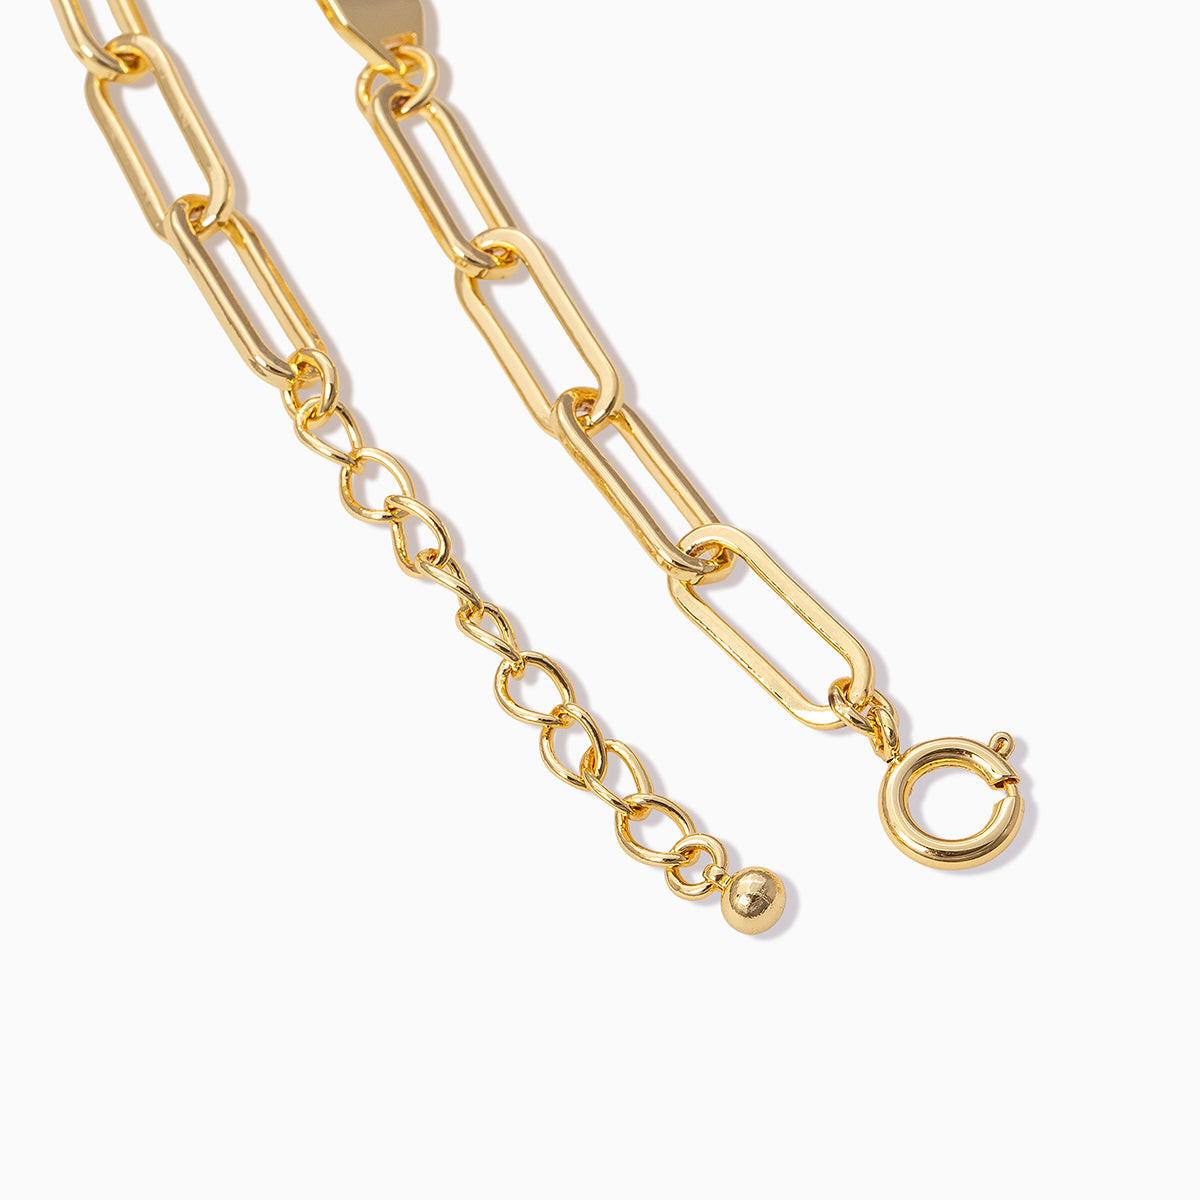 Chain and Bar Bracelet | Gold | Product Detail Image 2 | Uncommon James